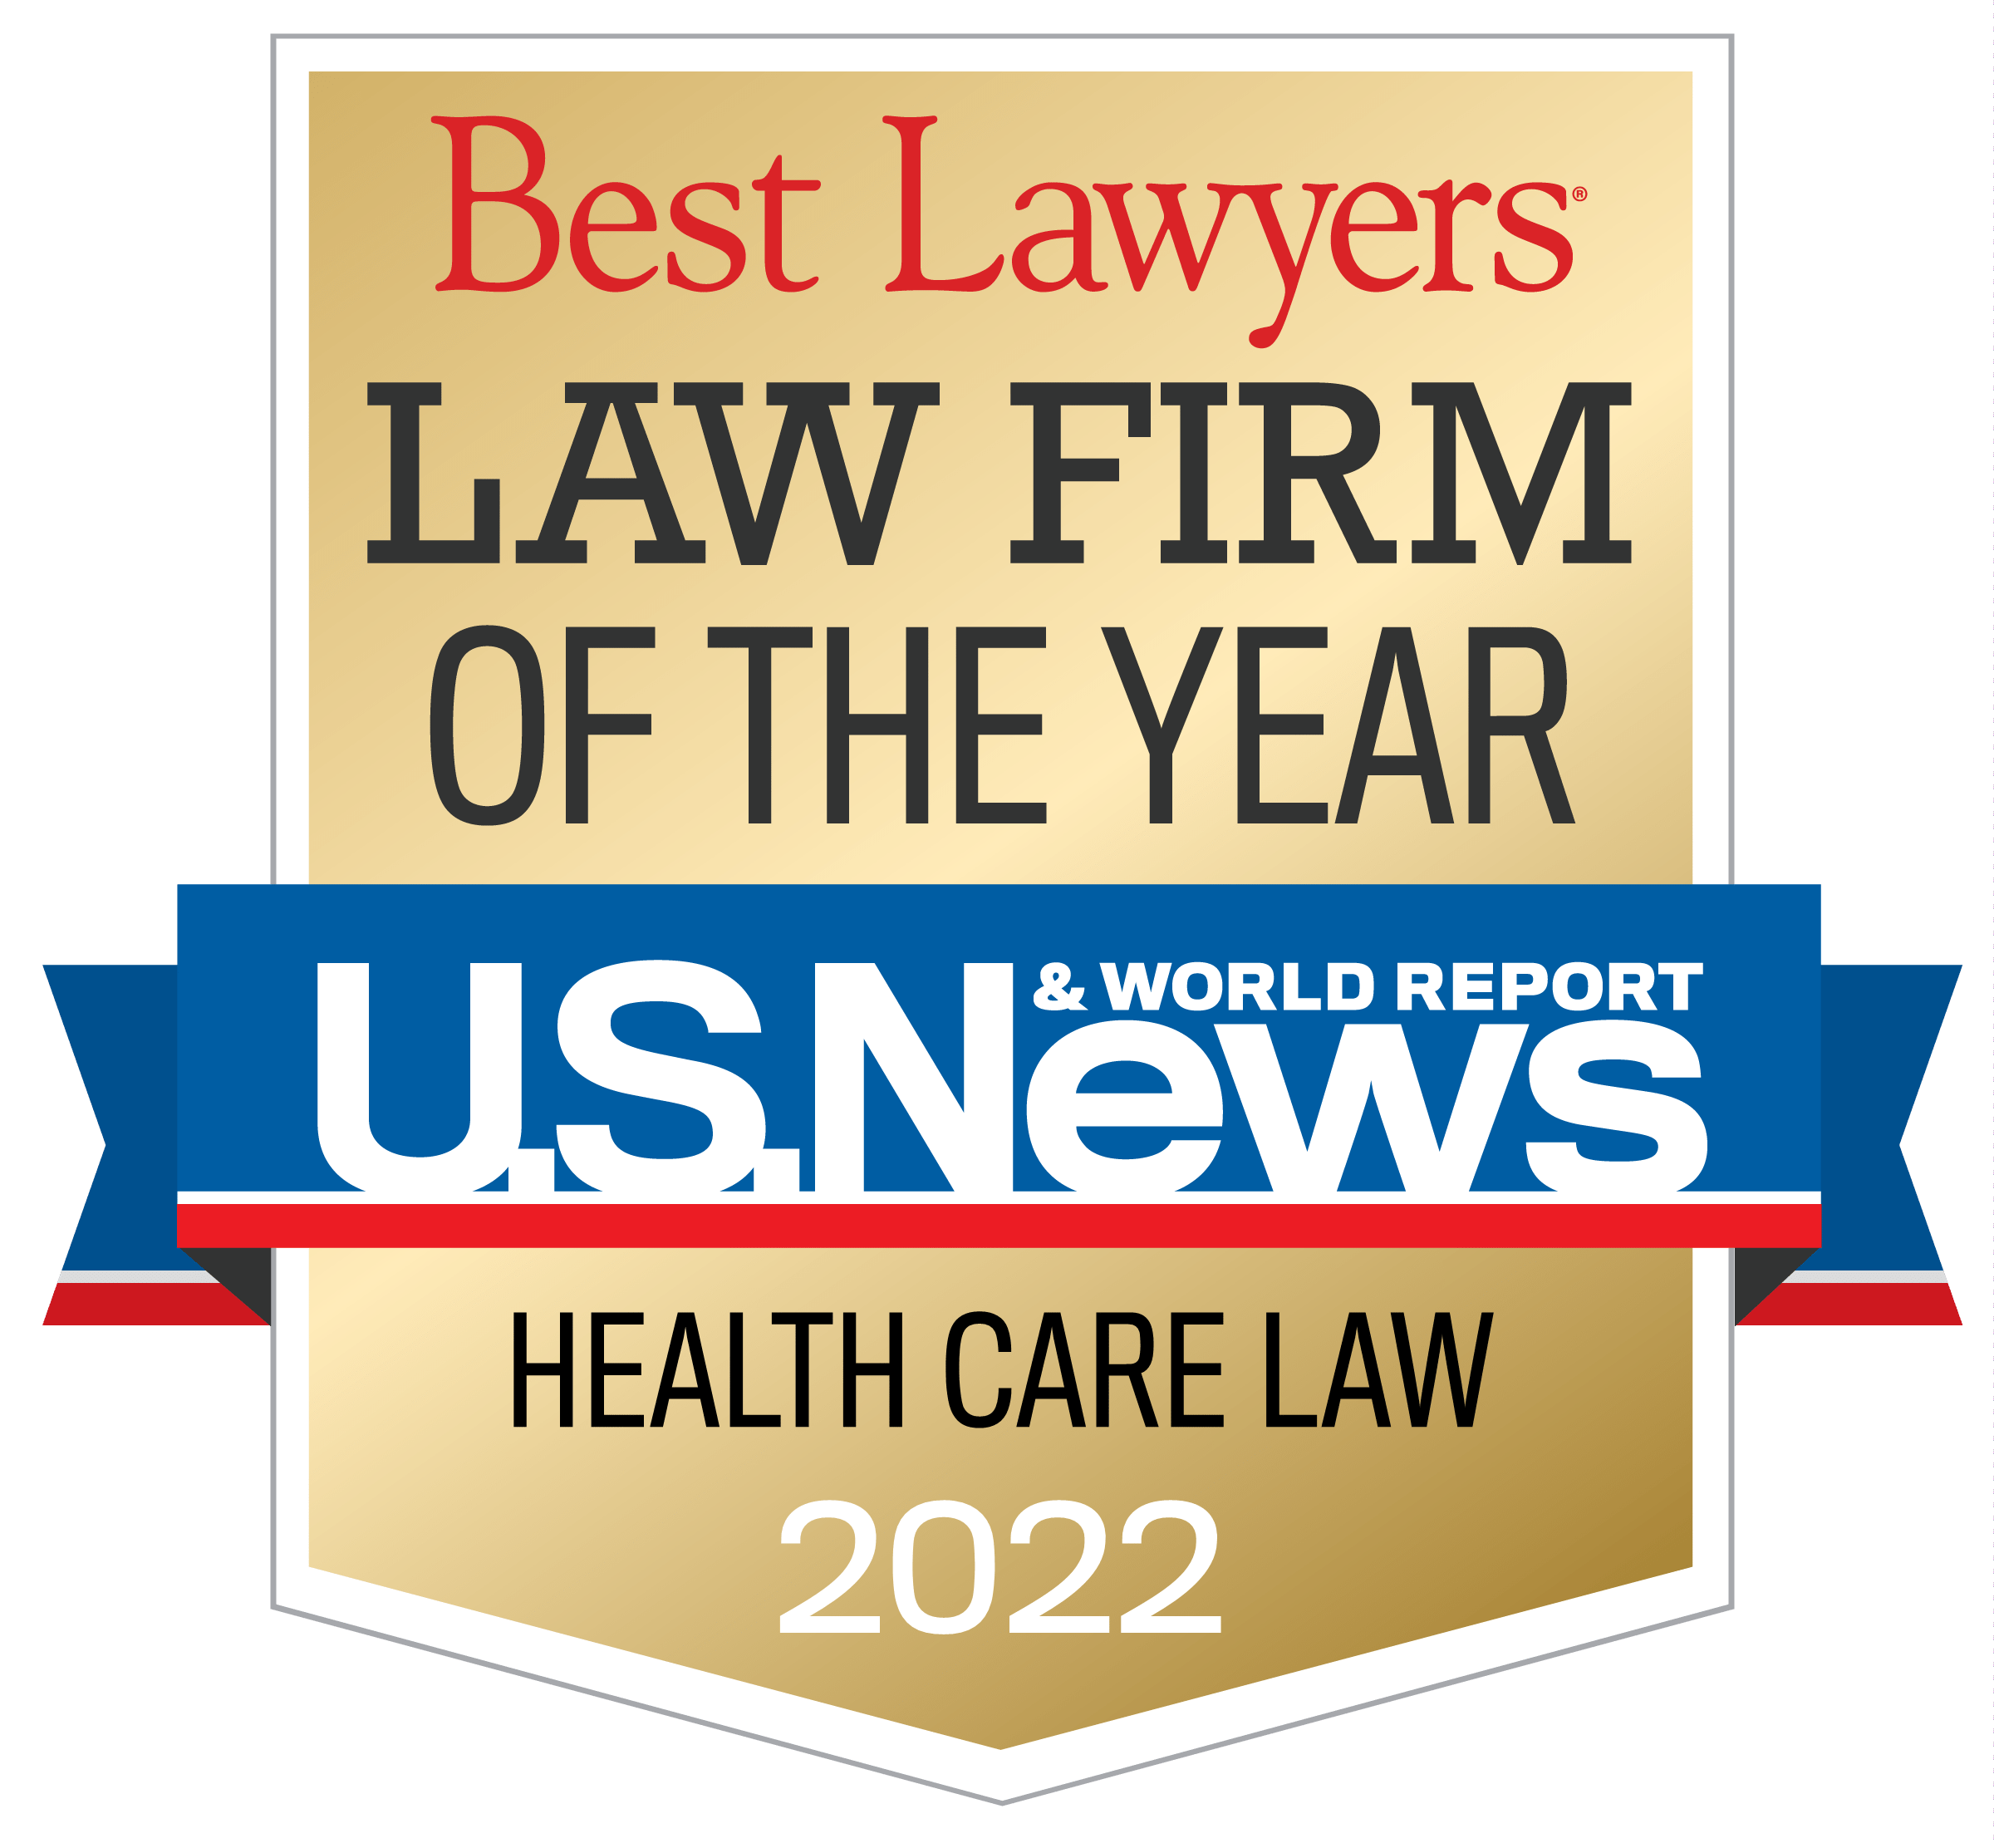 U.S. News Law Firm of the Year 2022 Health Care Law